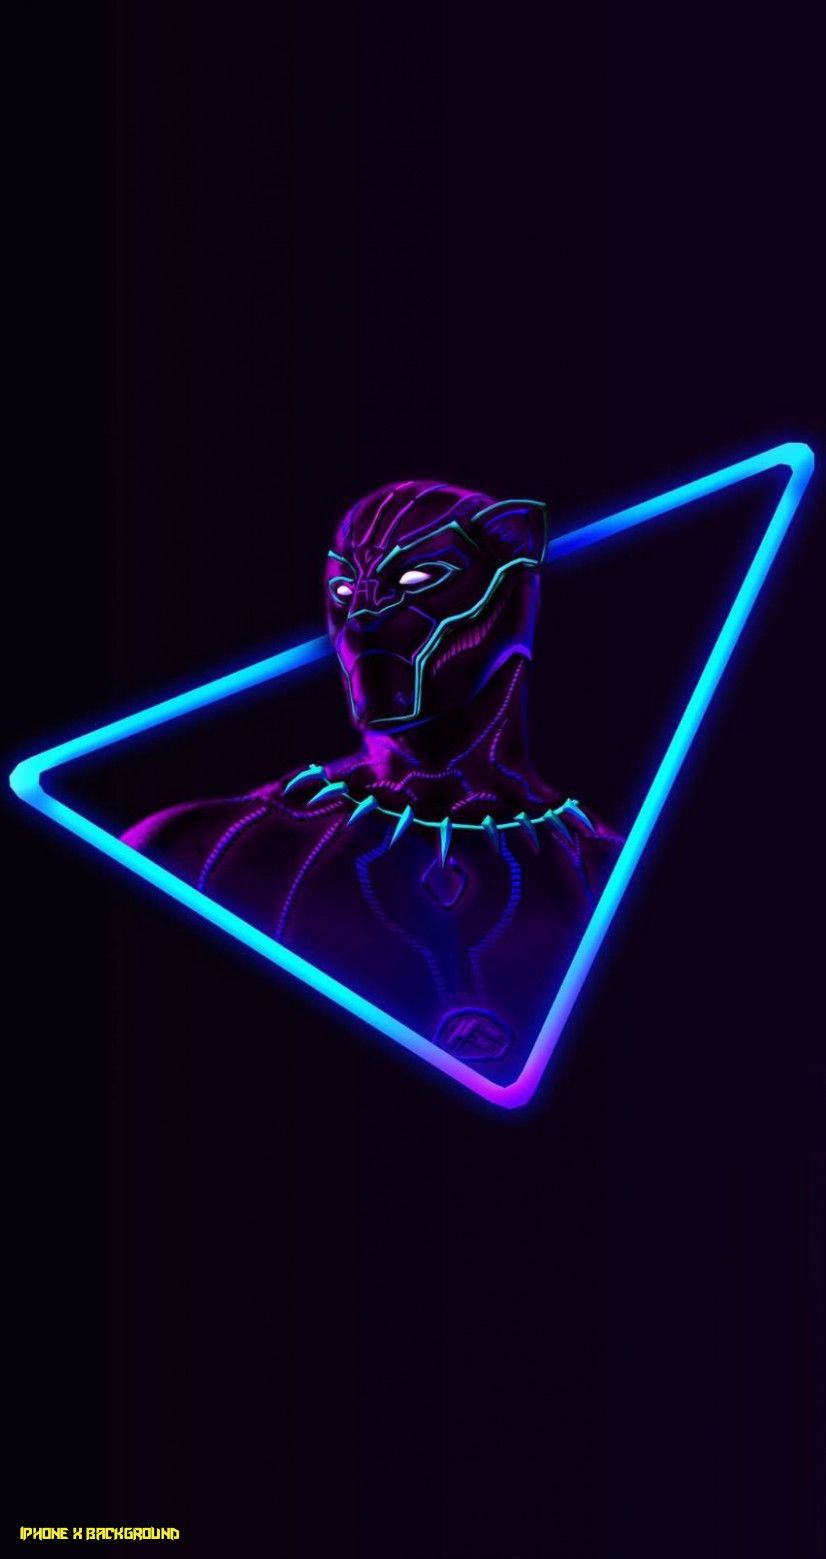 Neon Avengers Parallax Wallpaper For iPhone 13 iPhone X